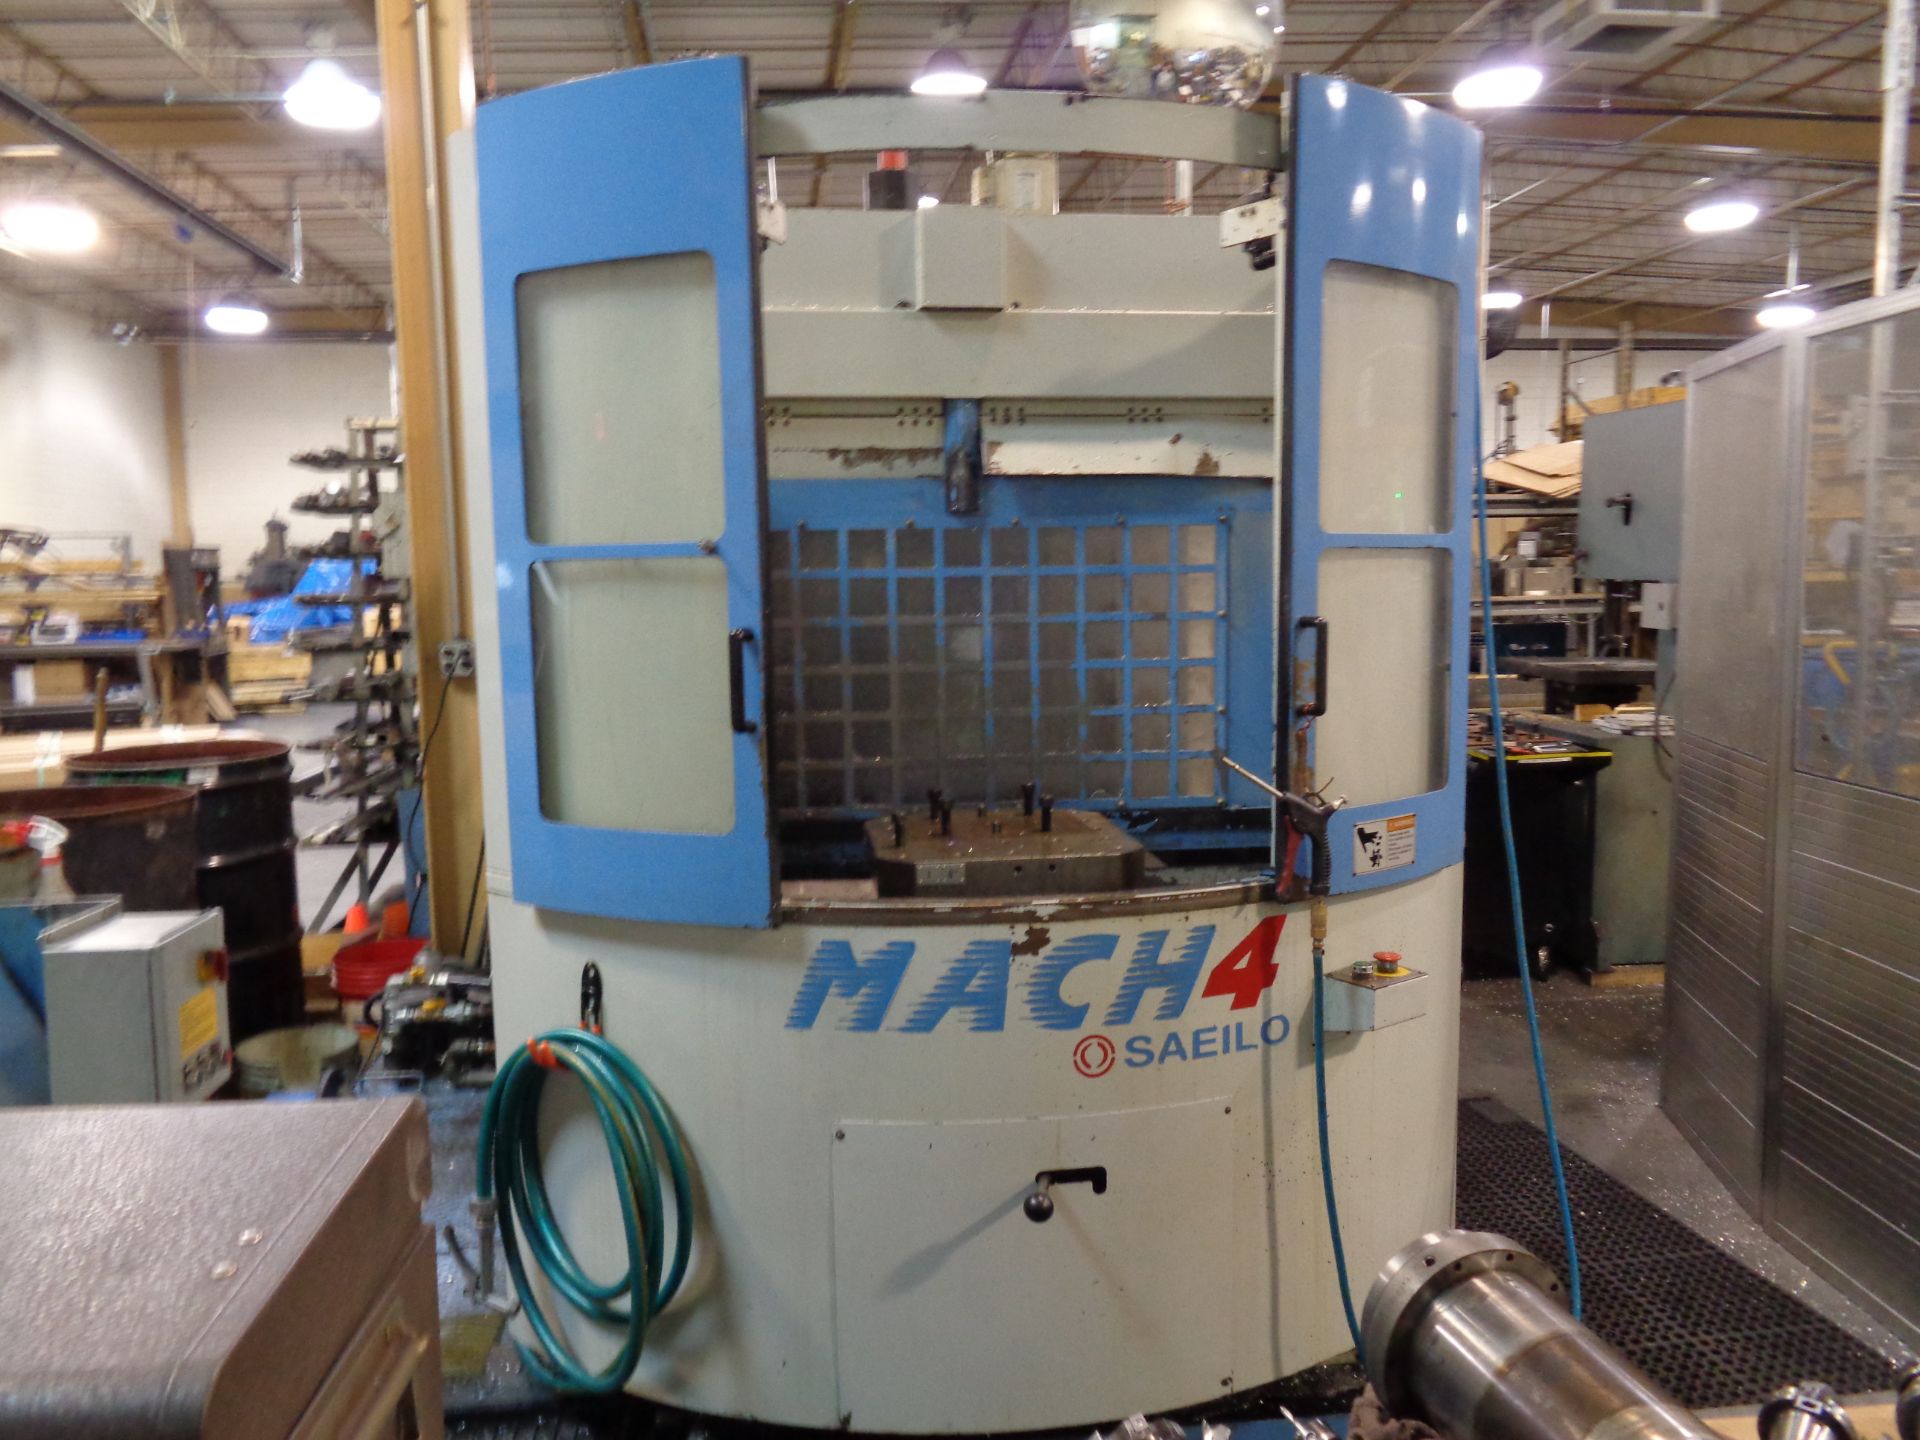 SAEILO Mach 4 Horizontal Cnc Machining Center - FANUC Control ( Being Sold Off Site )